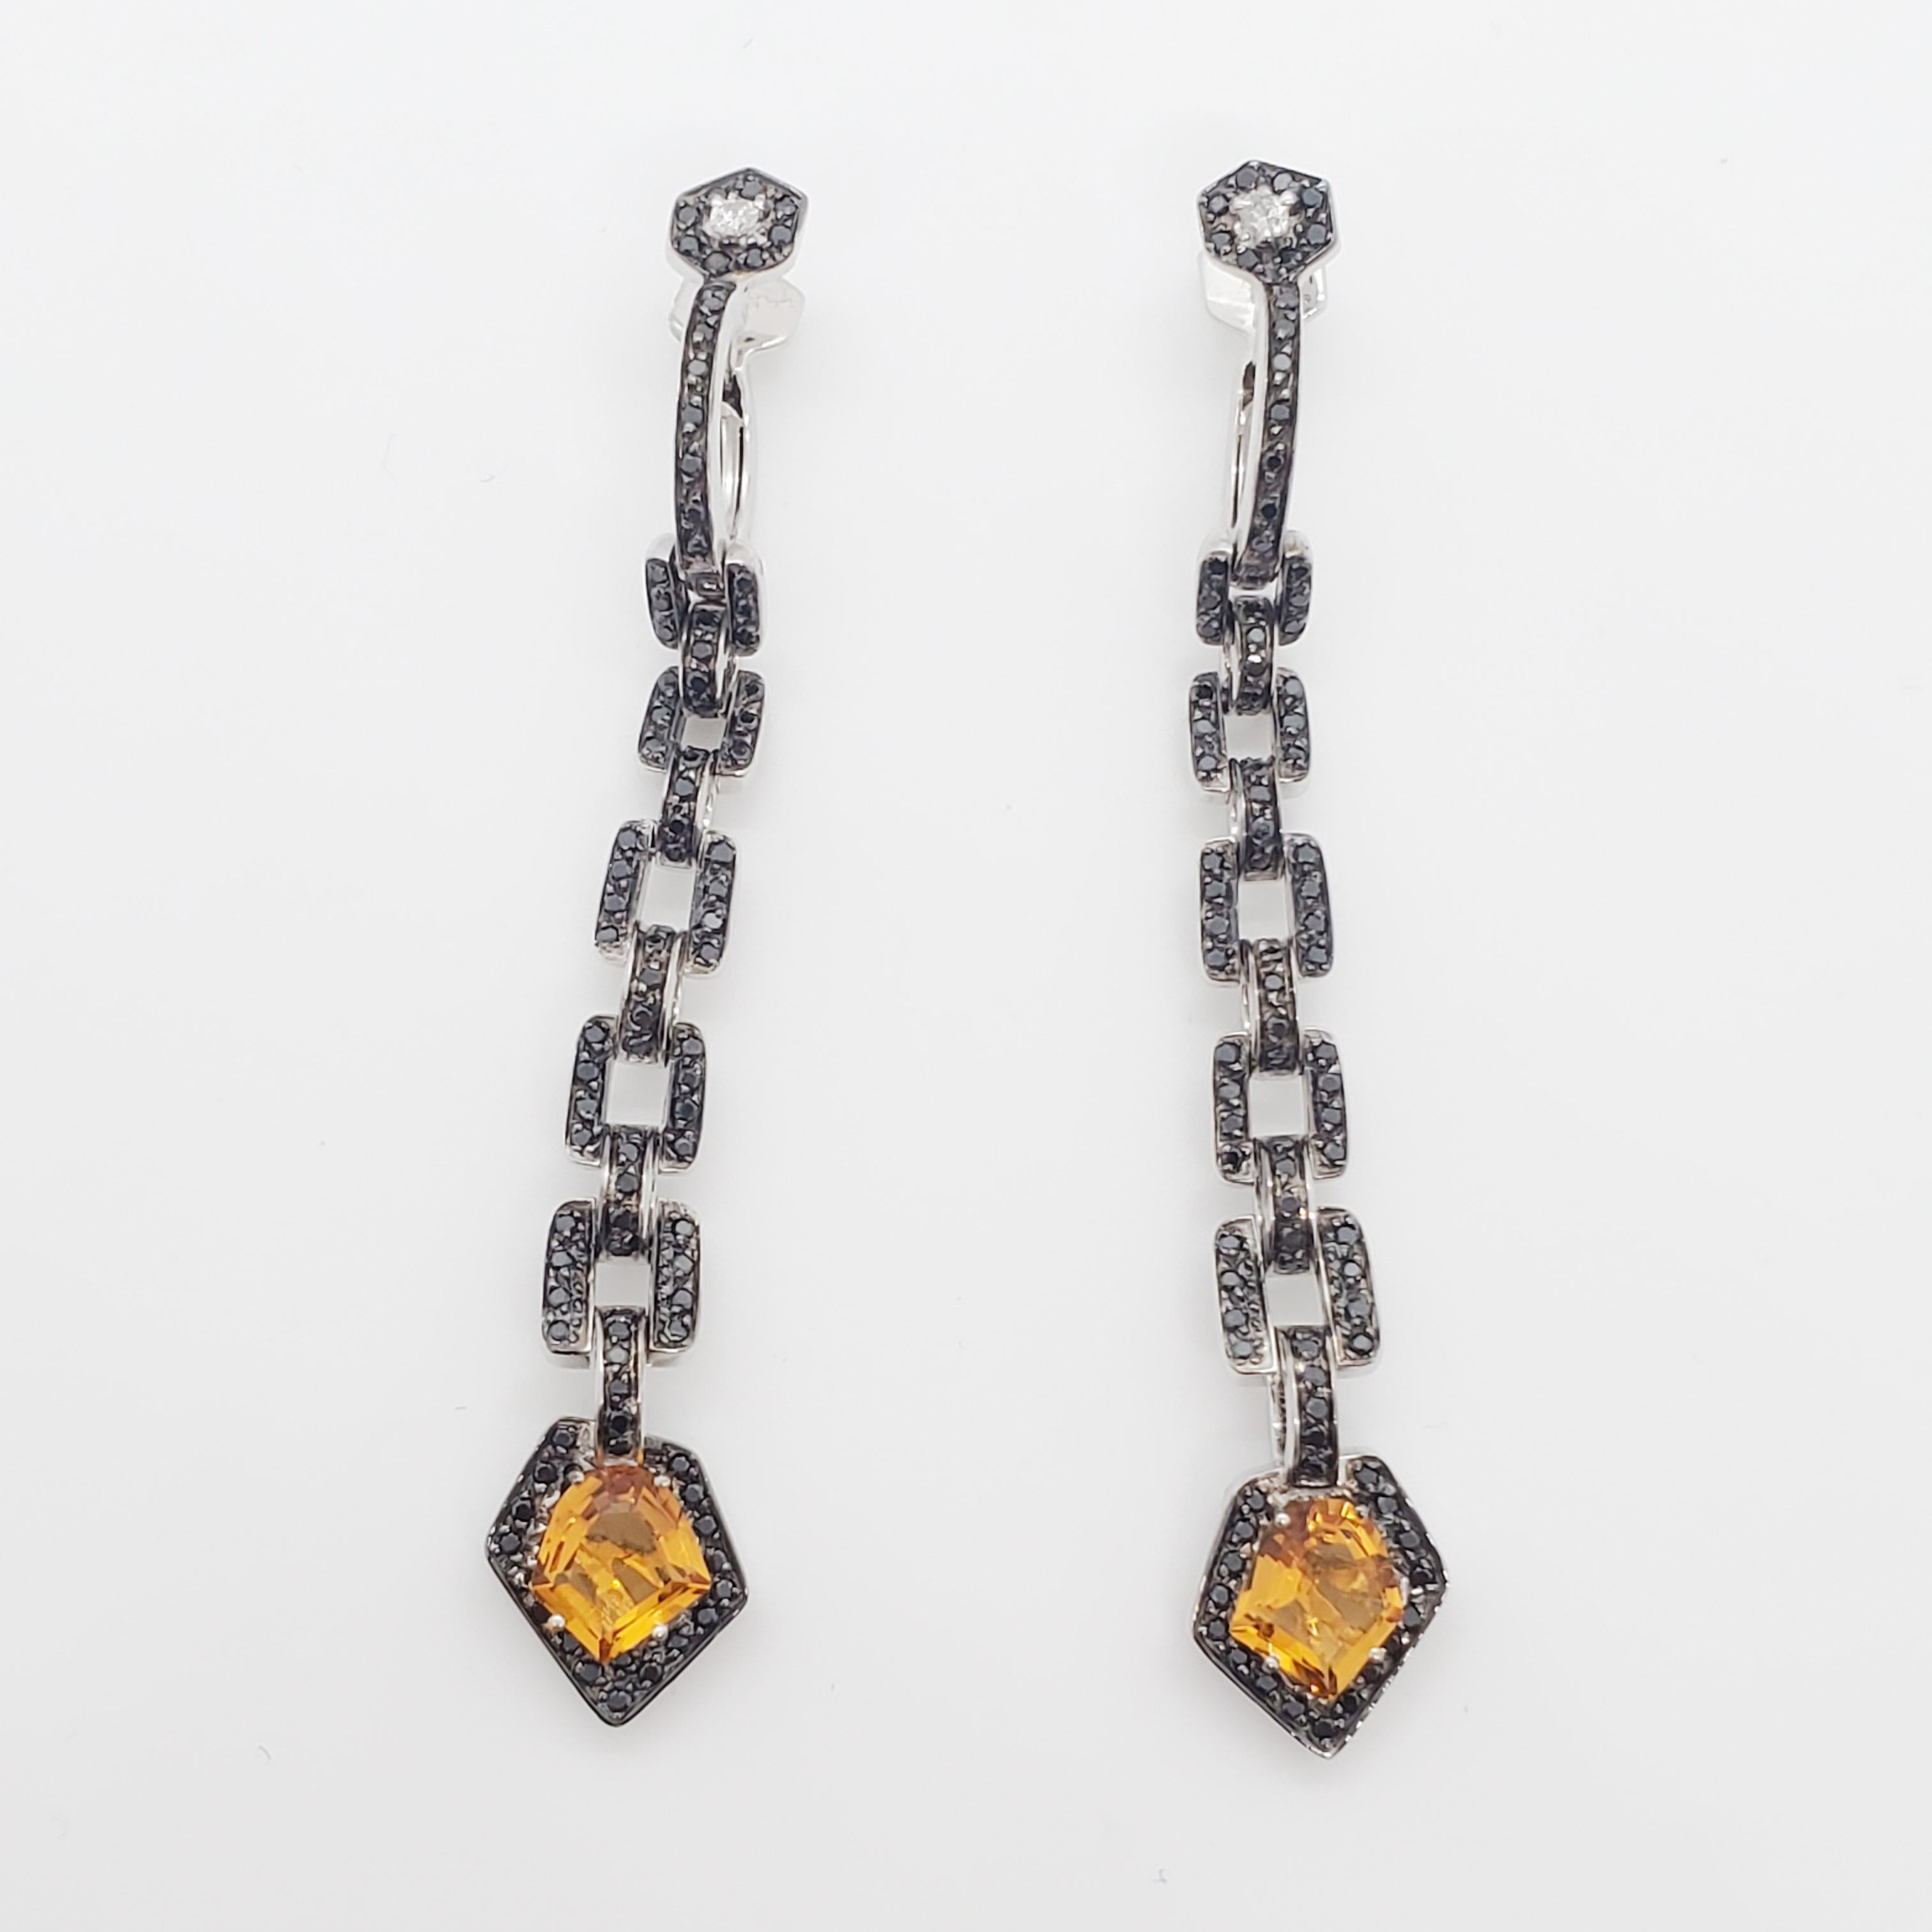 Stunning estate H. Stern earrings featuring 2.44 ct. citrines in a novelty cut with 5.50 ct. of black diamond rounds.  